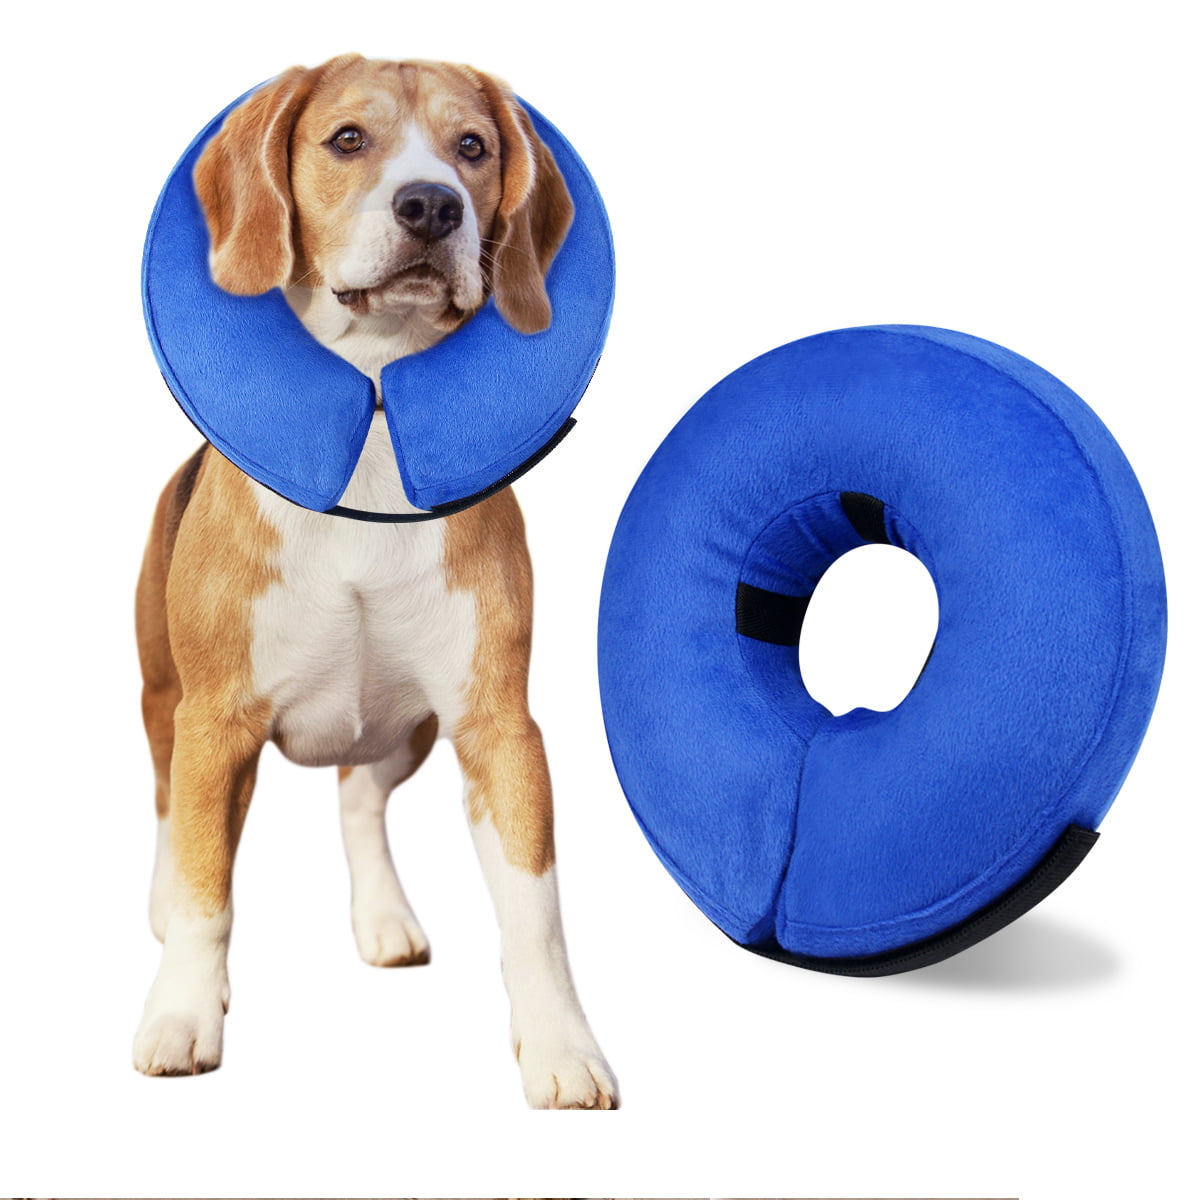 AhlsenL Inflatable Comfy Cone for Dogs Cats Protective Soft Pet Recovery Collar After Surgery Prevent Dogs from Biting & Scratching 